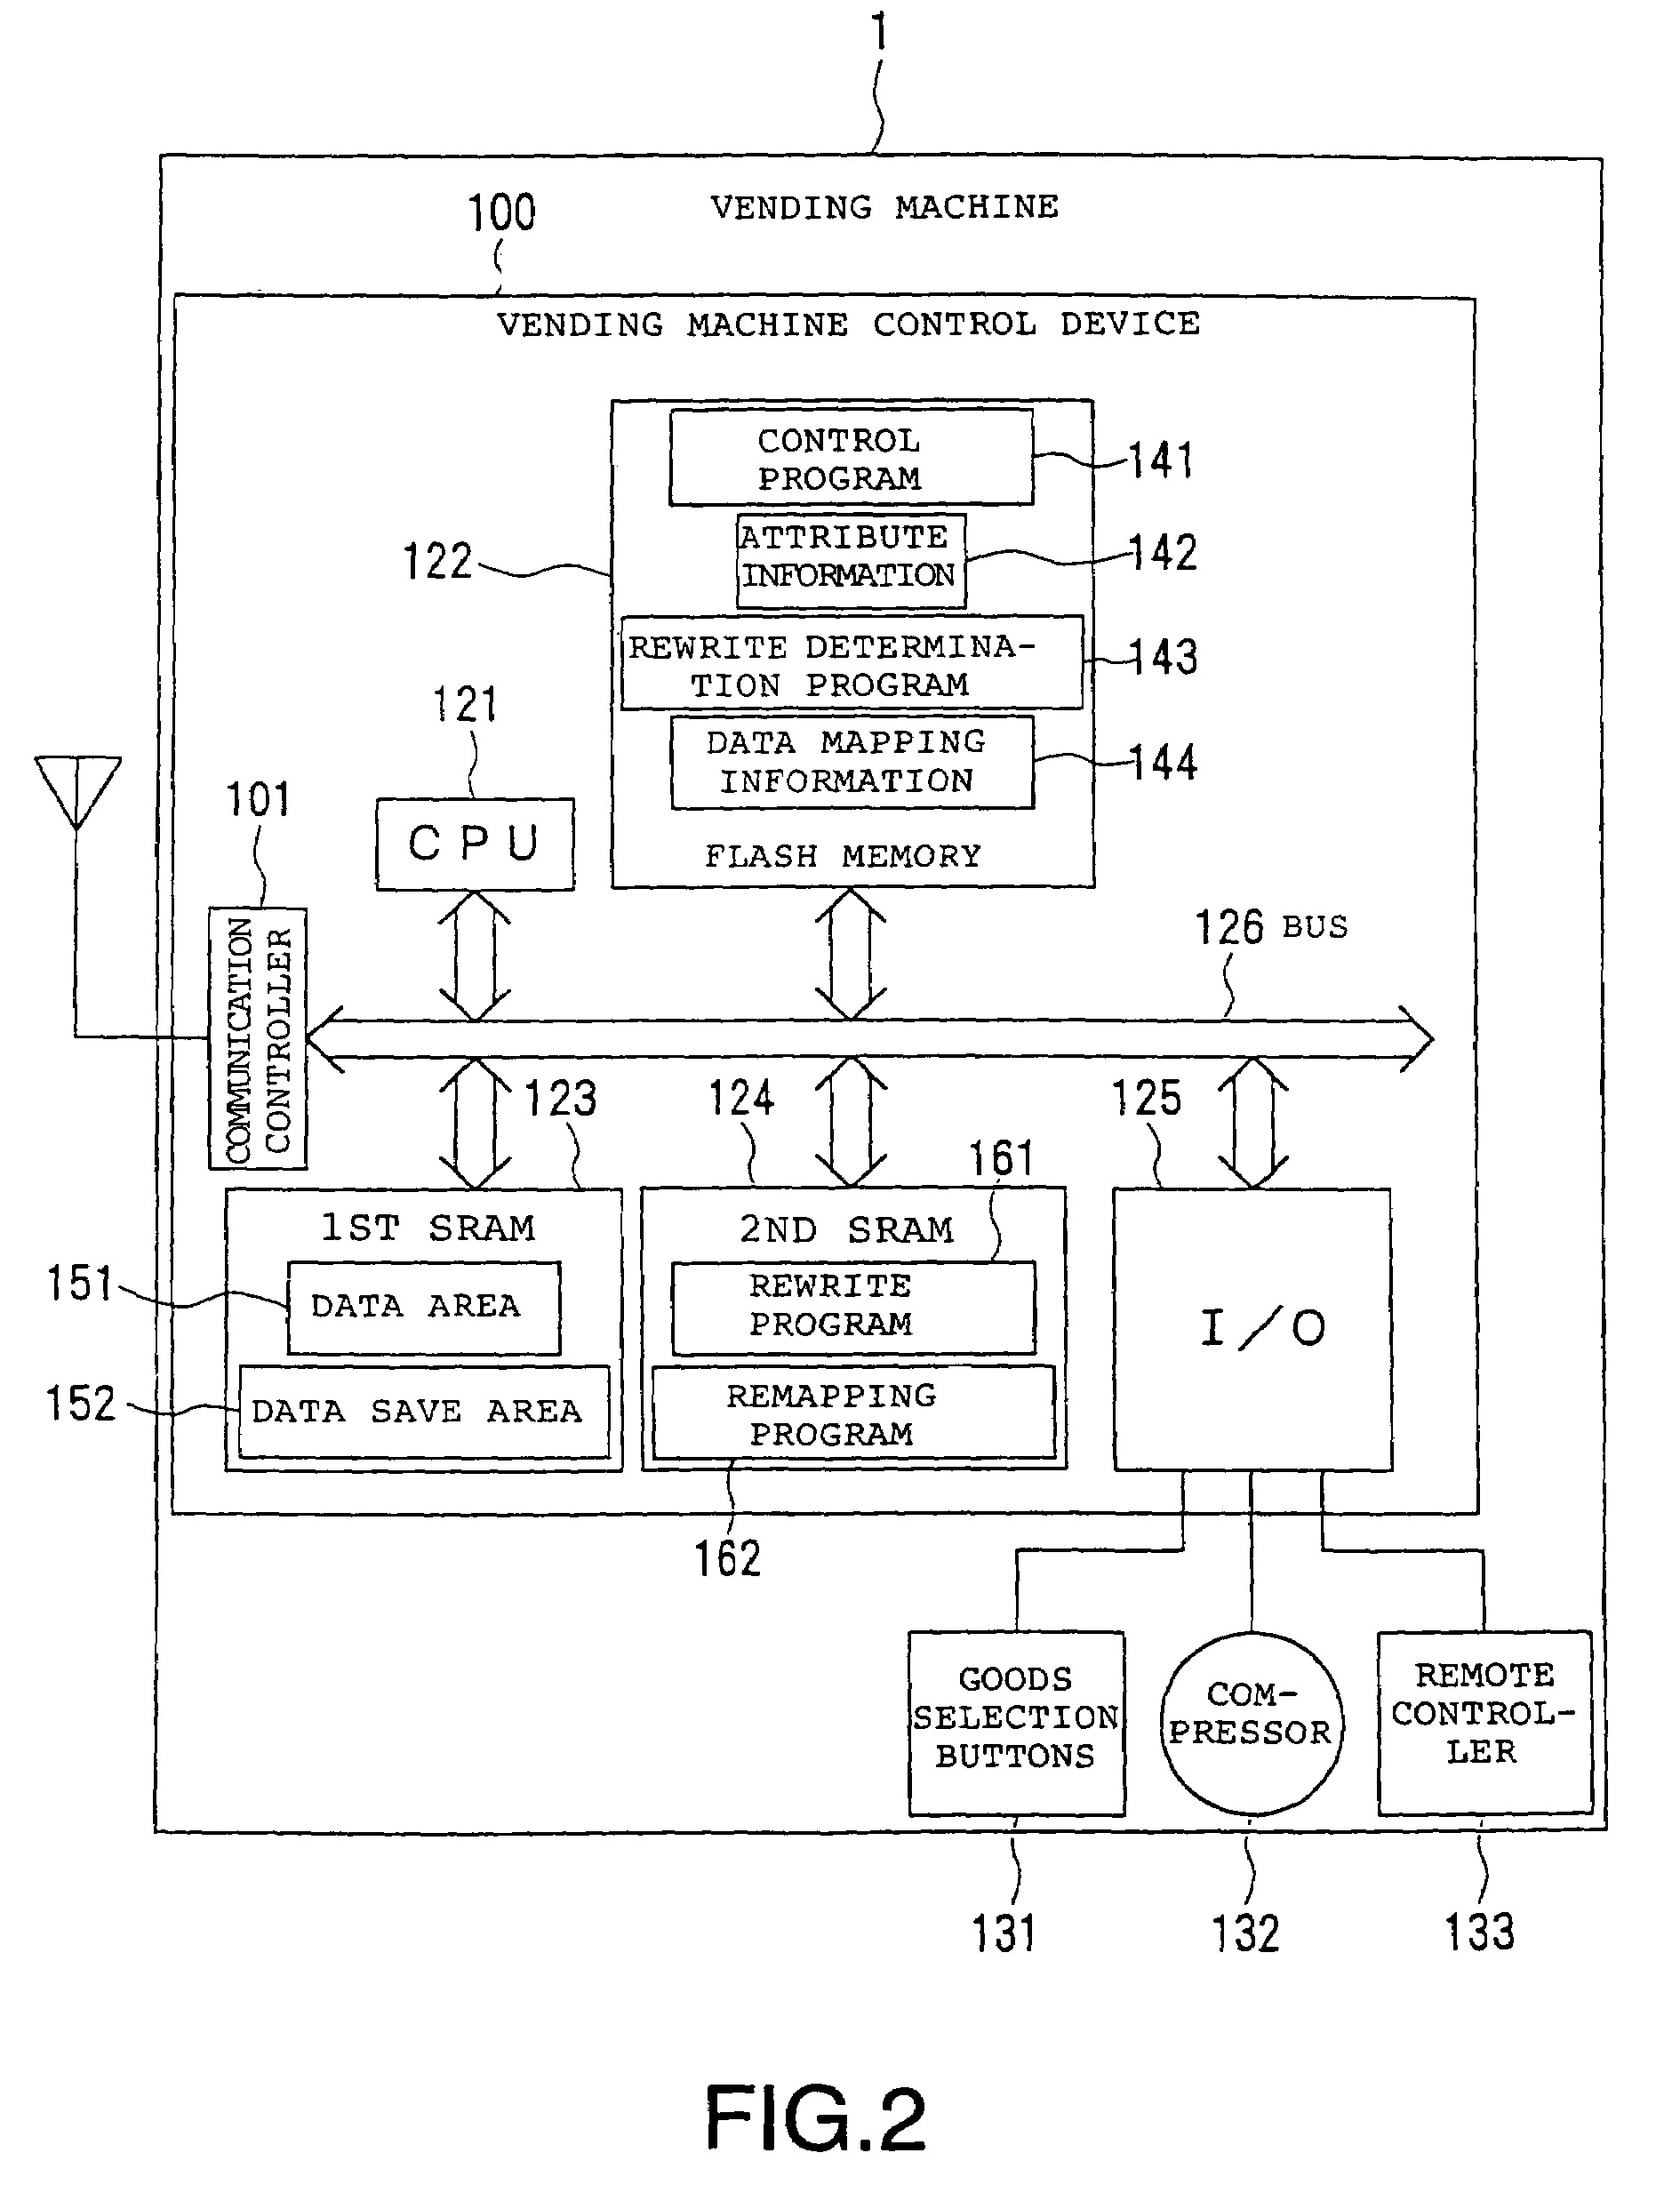 System for rewriting control program in vending machine